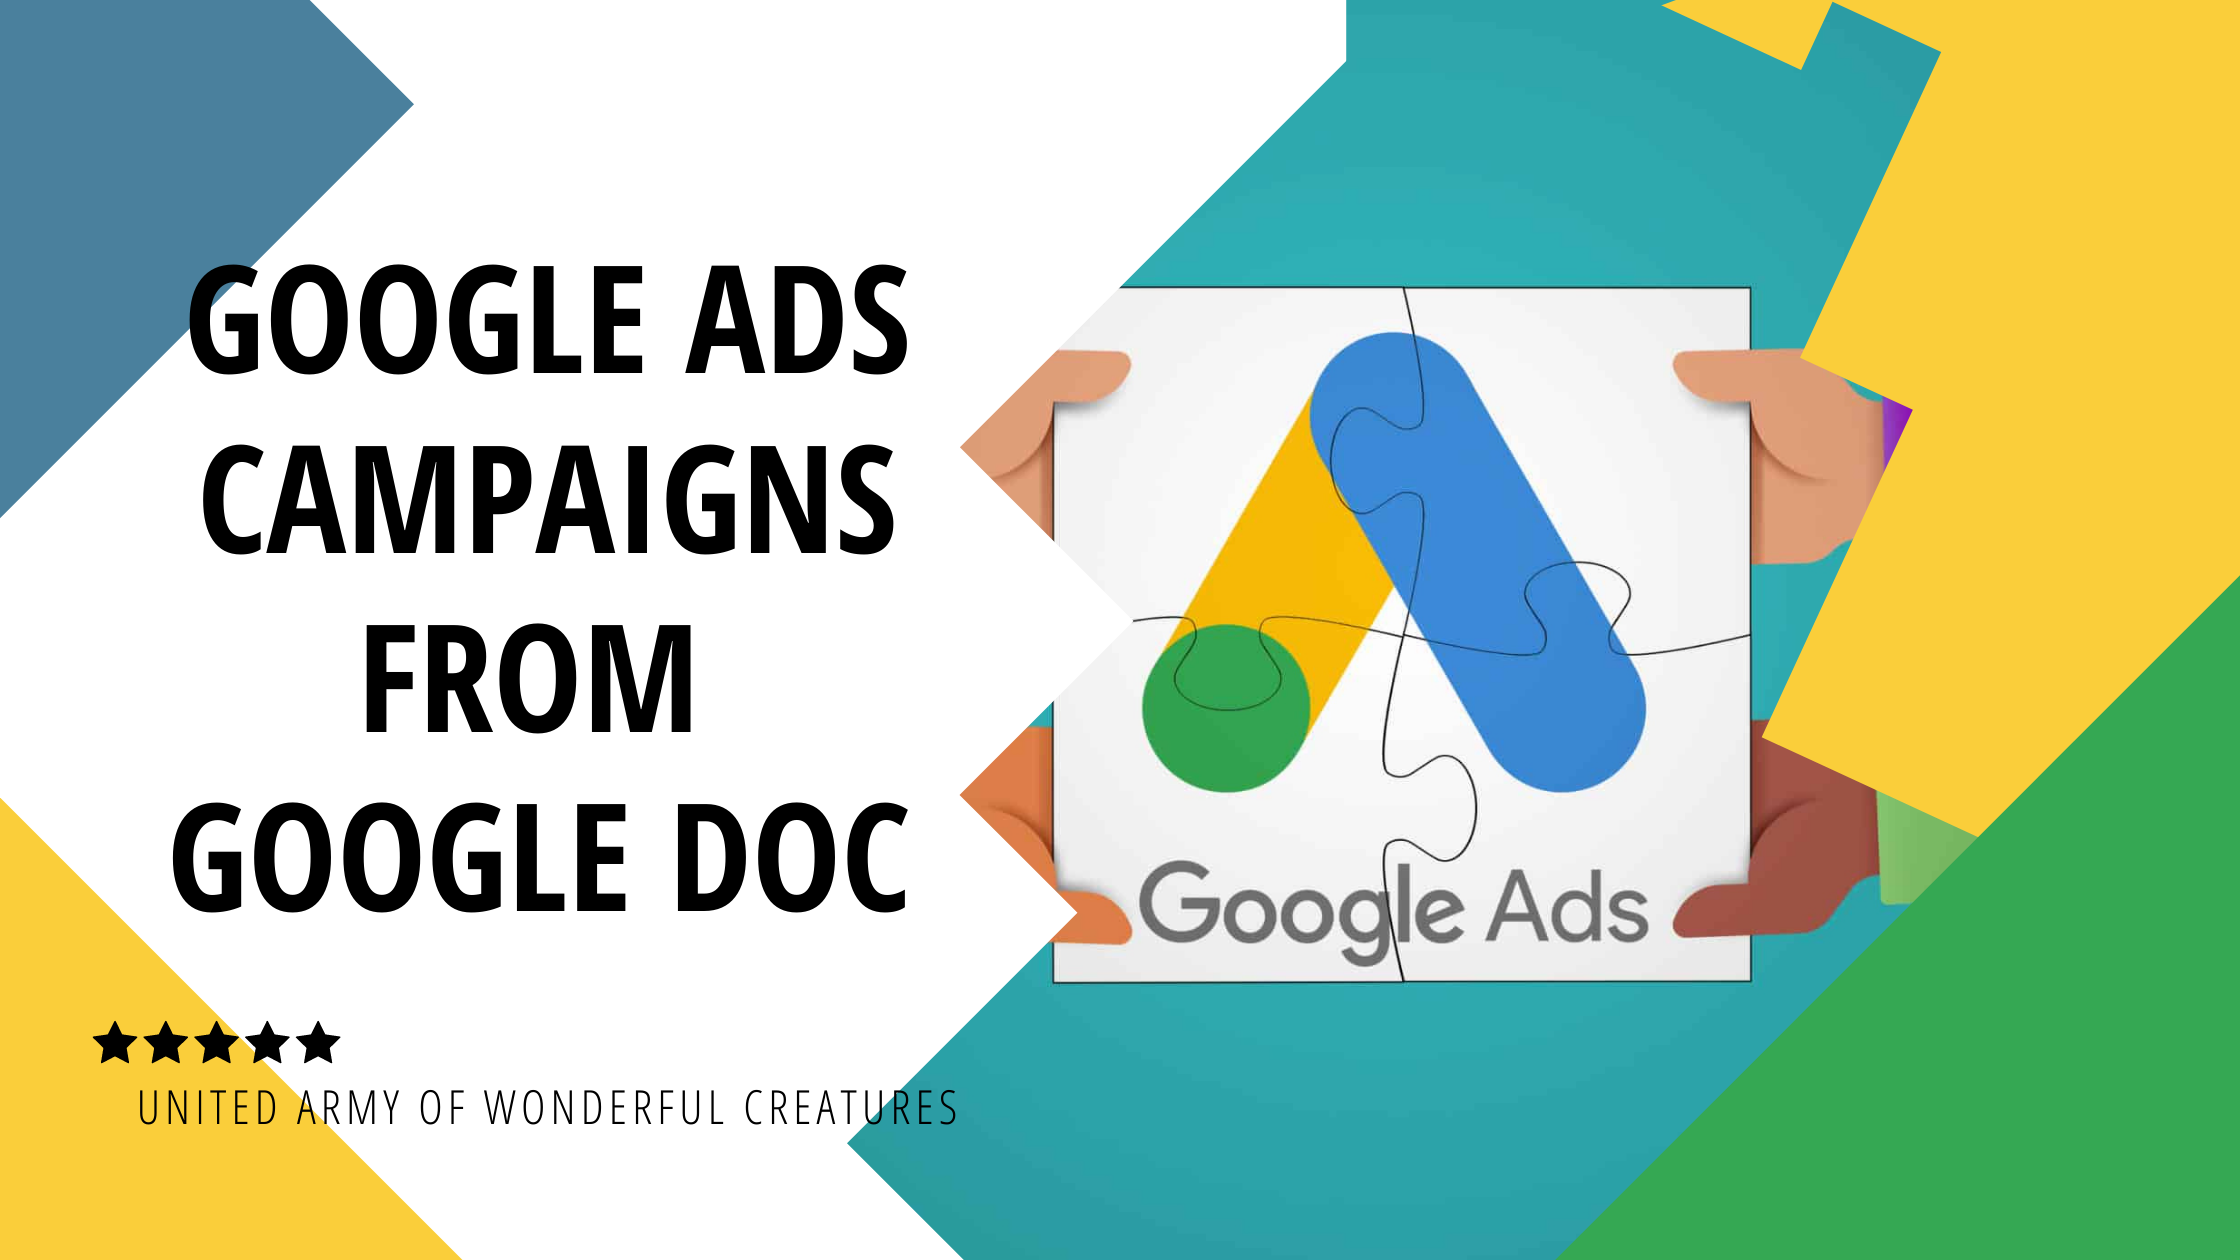 Script: Set up Google Ads Campaigns Directly from Google Doc